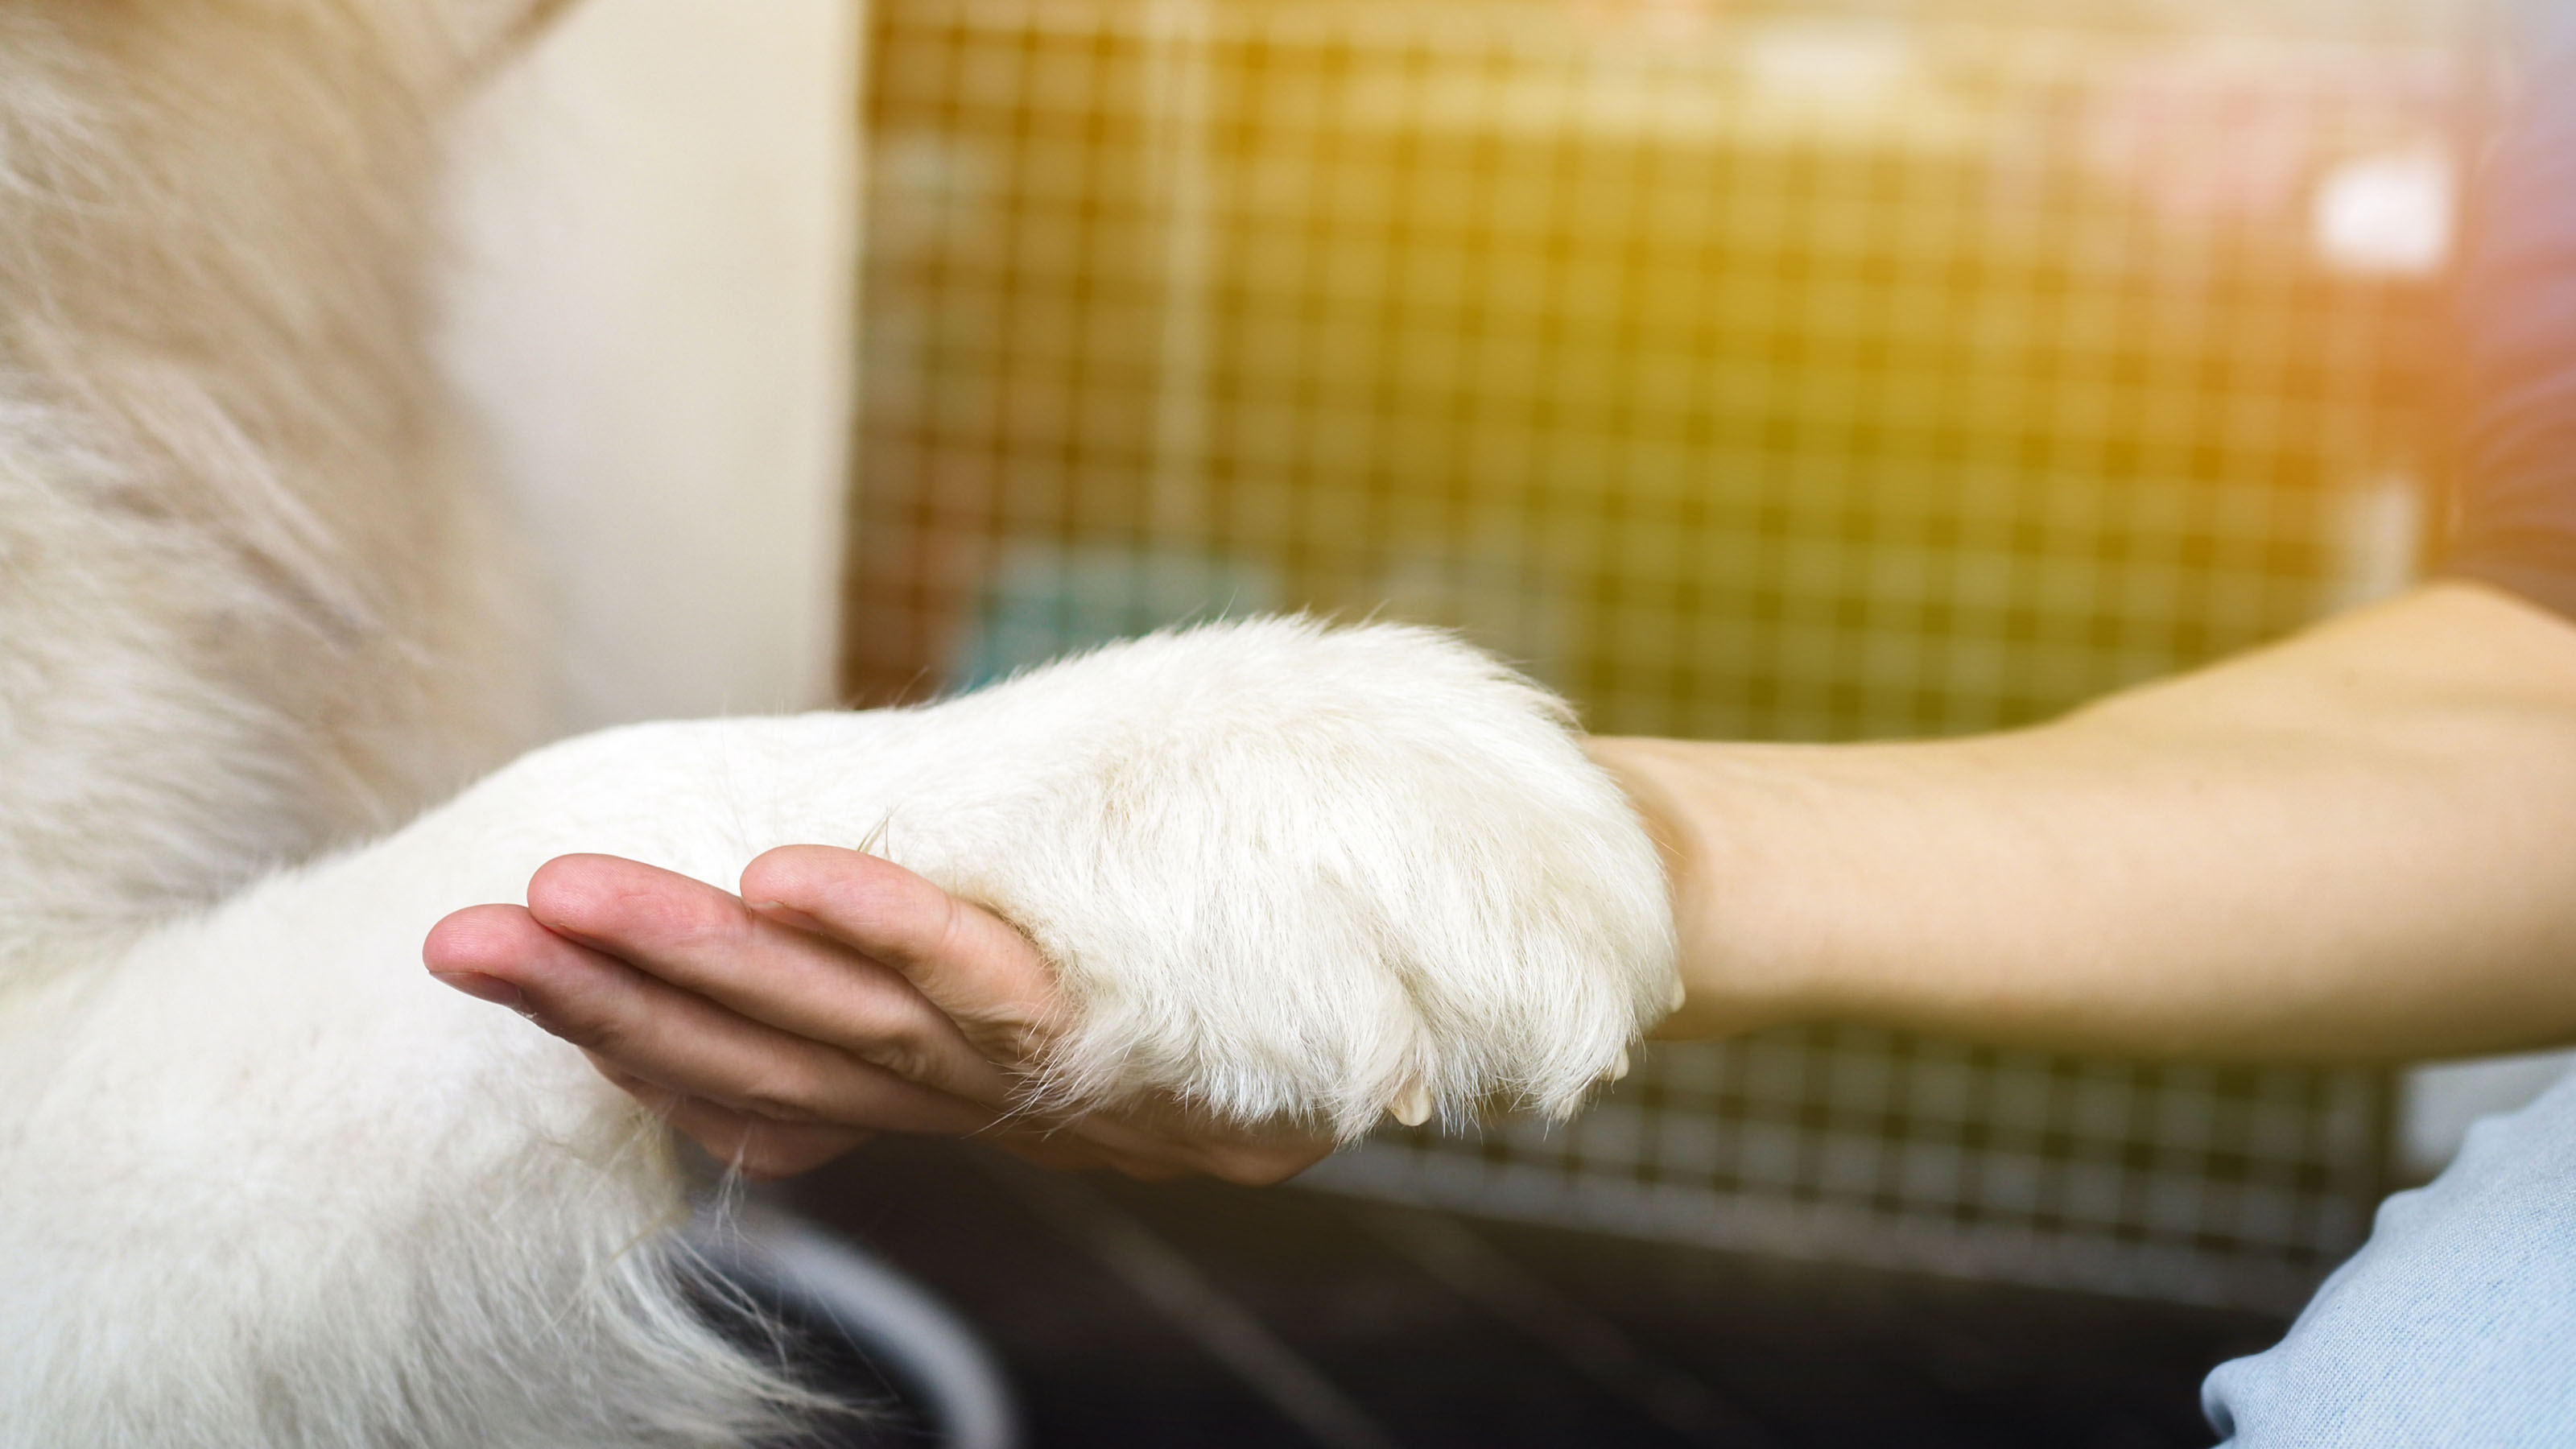 How To Cut Dog Nails, Trim Your Dog's Nails Safely